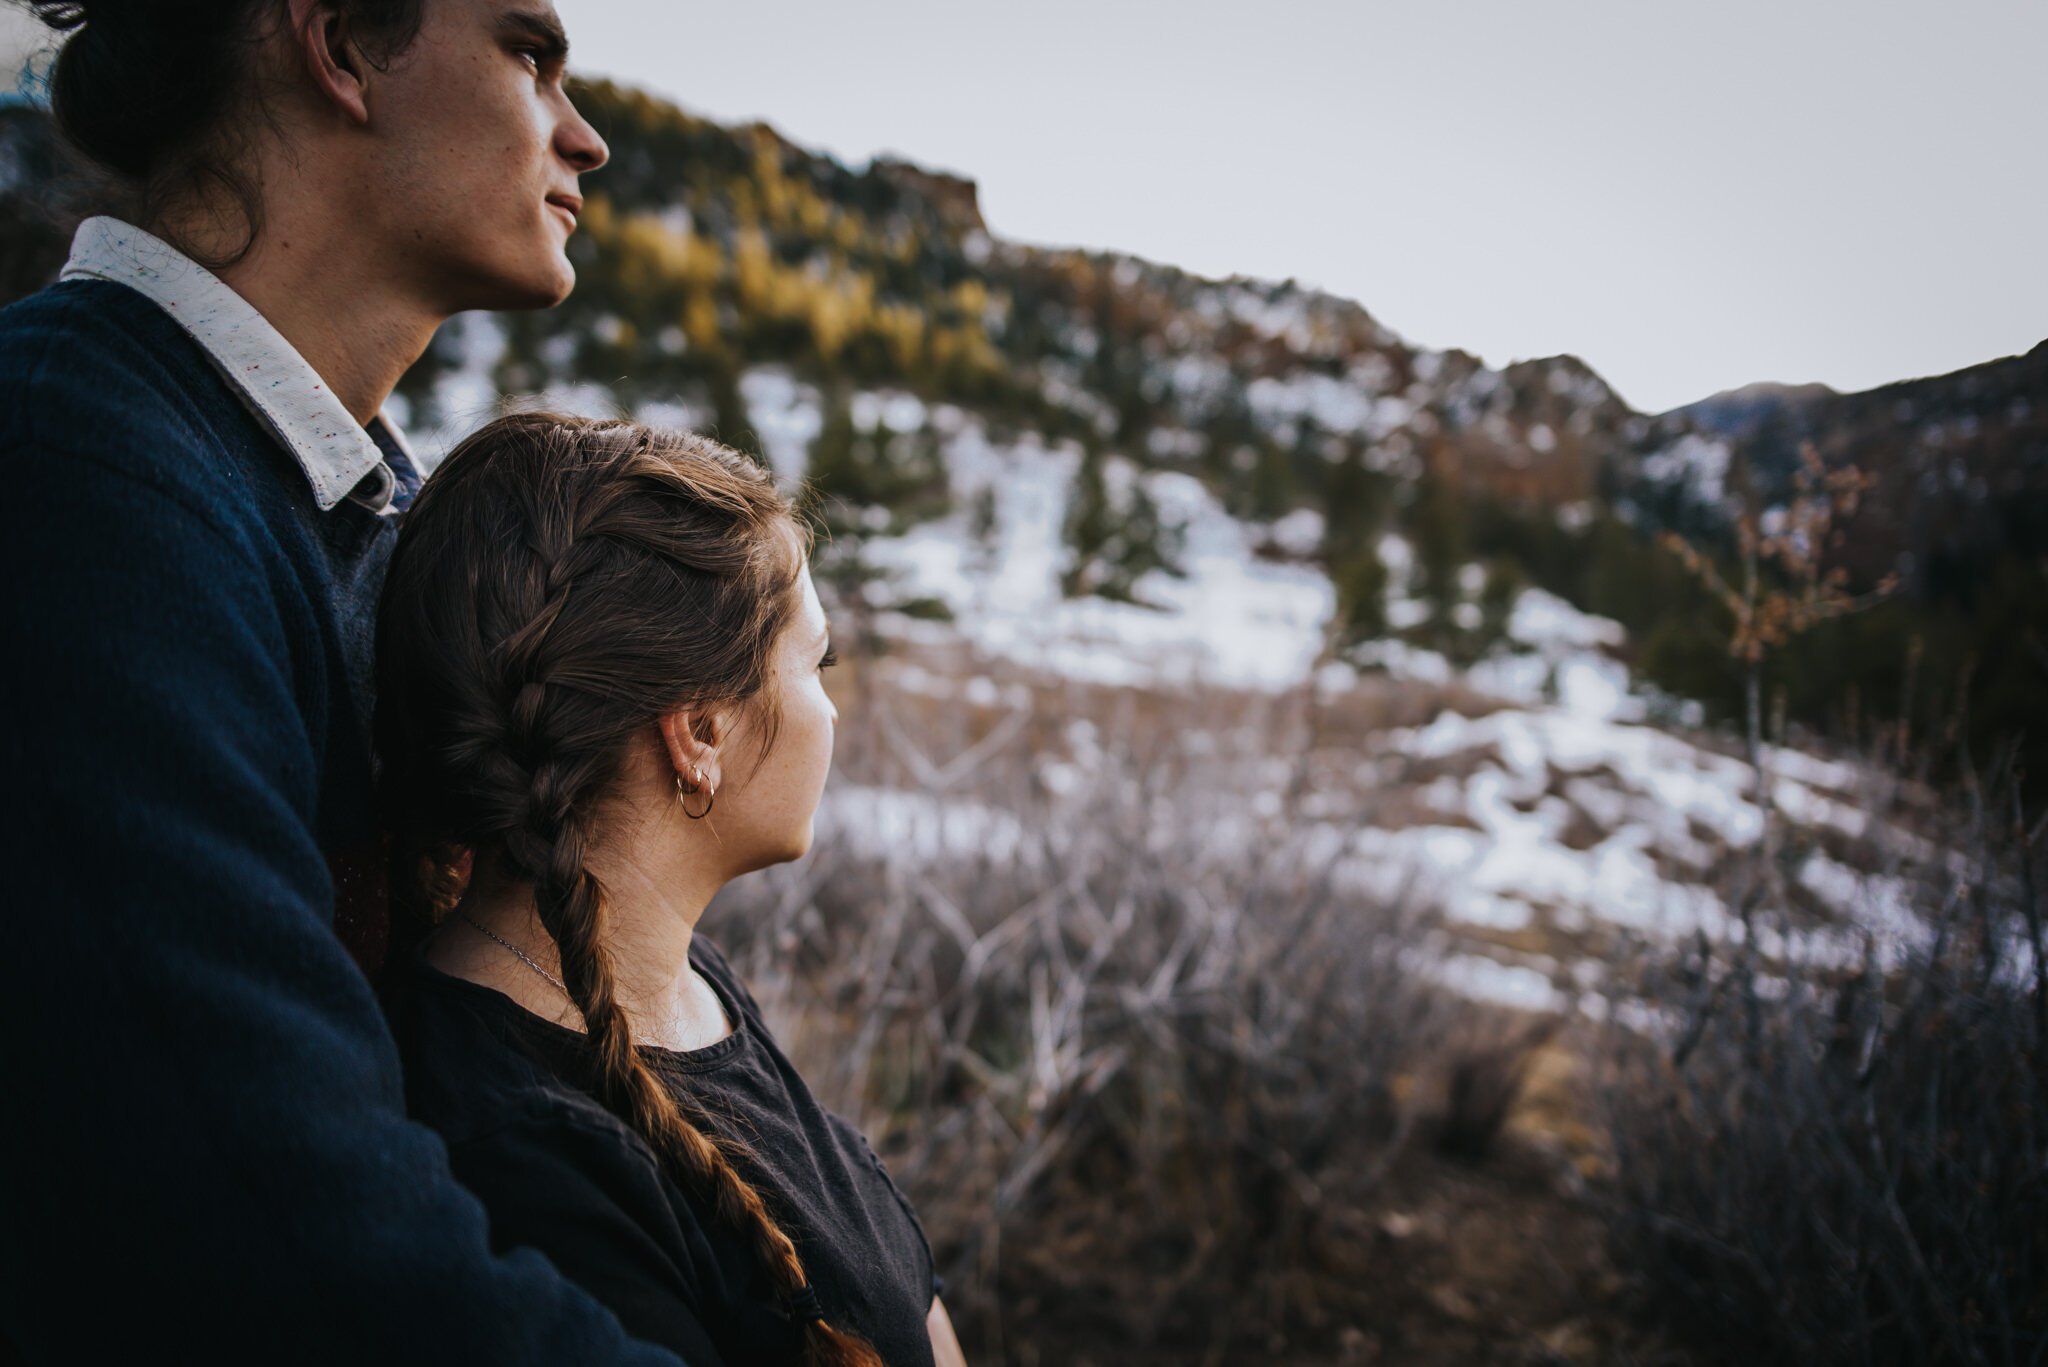 Yulia+and+Logan+Couples+Session+Colorado+Springs+Colorado+Sunset+Cheyenne+Canyon+Husband+Wife+Wild+Prairie+Photography-10-2020.jpeg